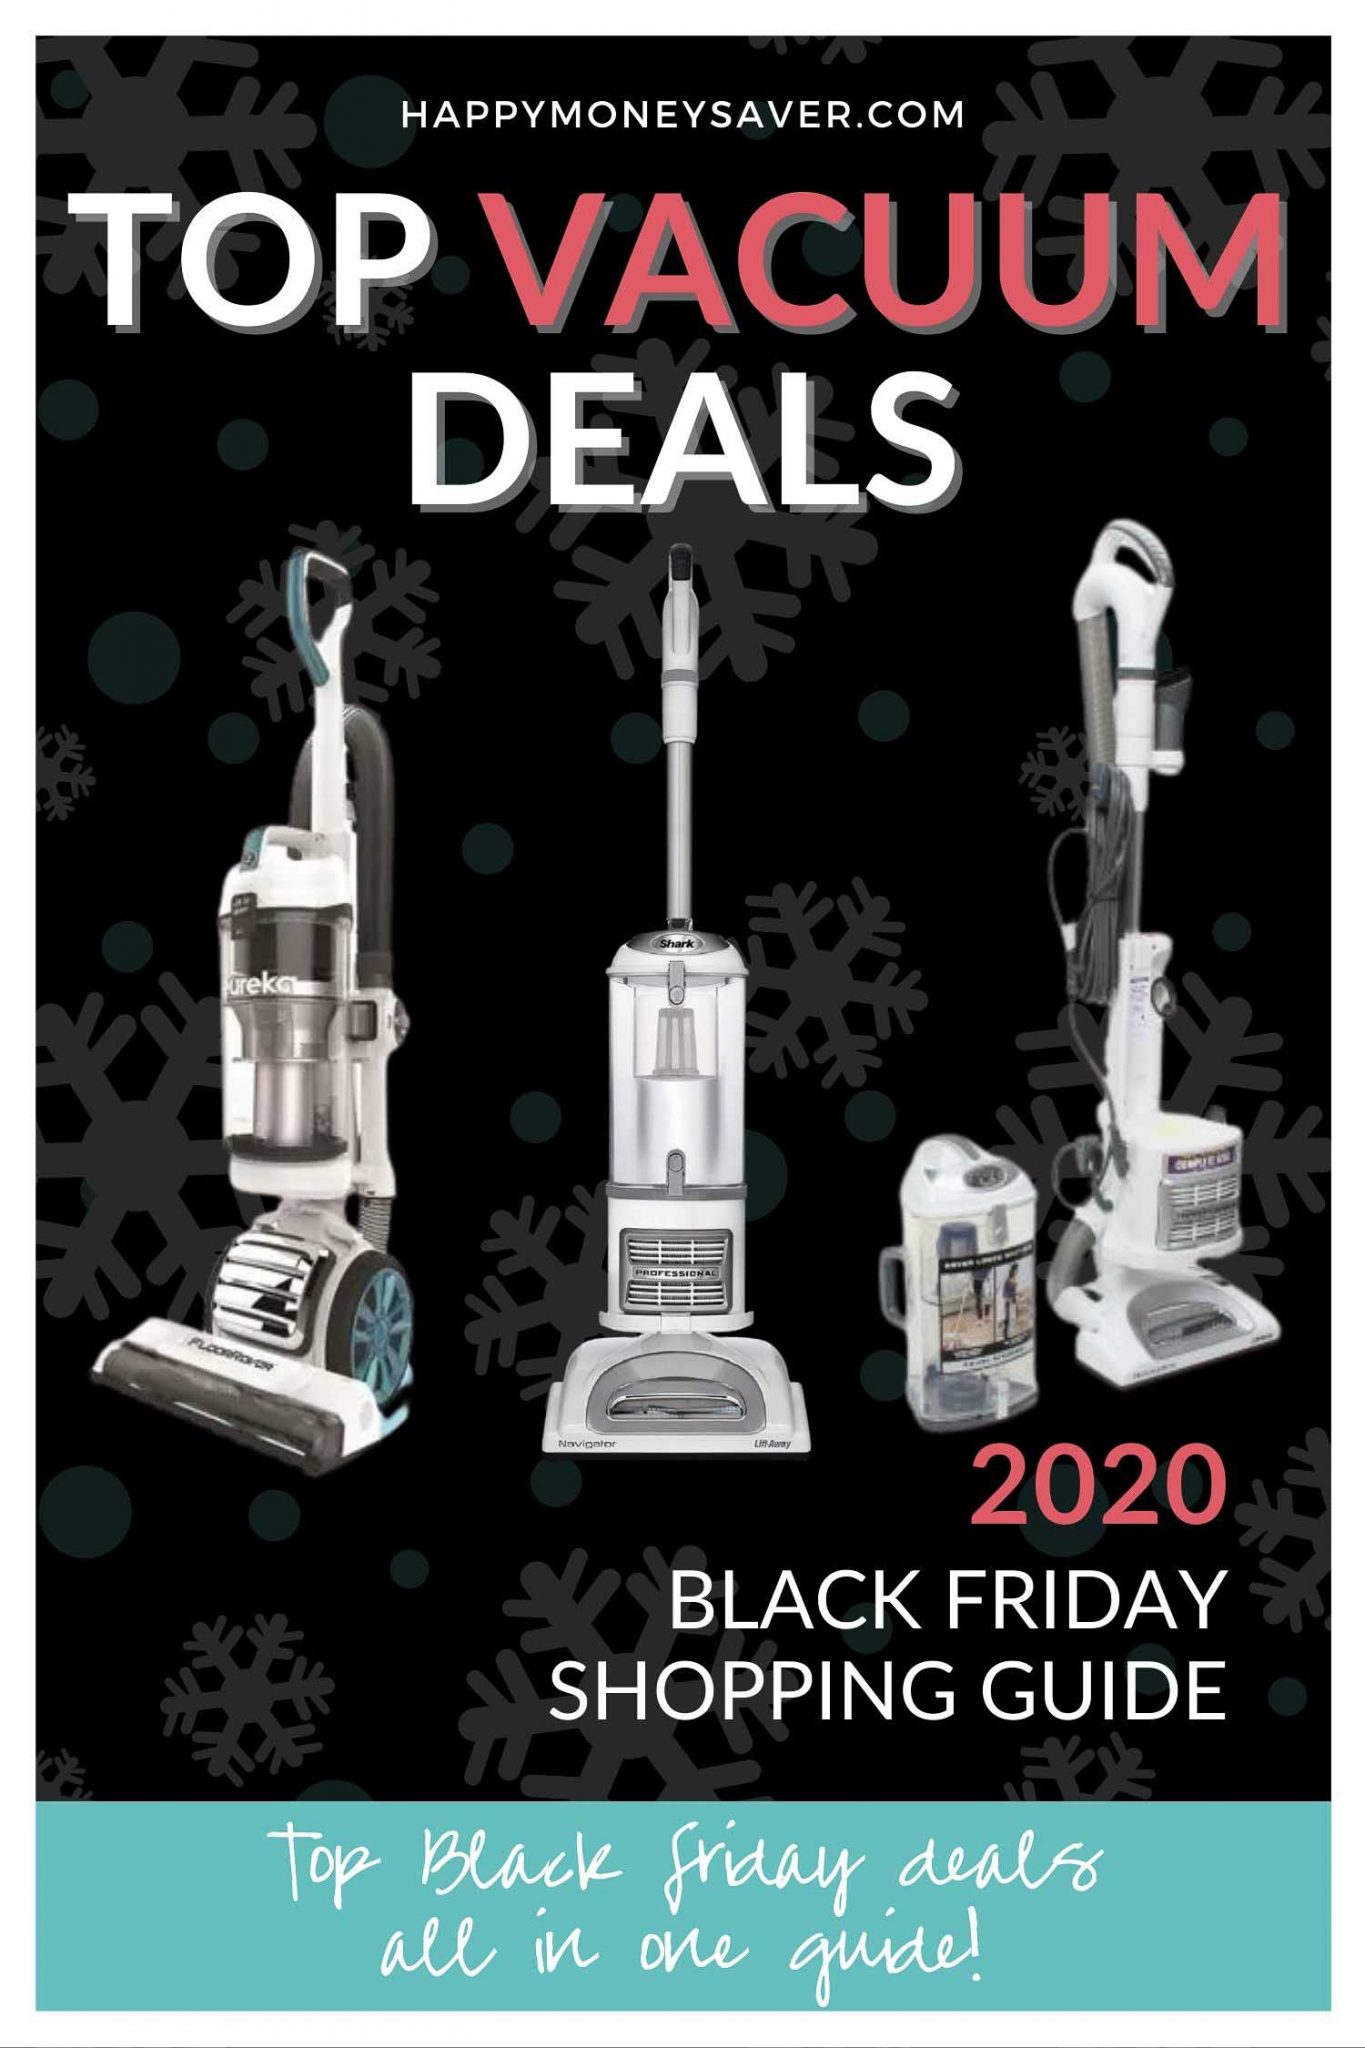 Top VACUUM Deals for Black Friday 2020 - Happy Money Saver - Will Dyson Do Any Black Friday Deals